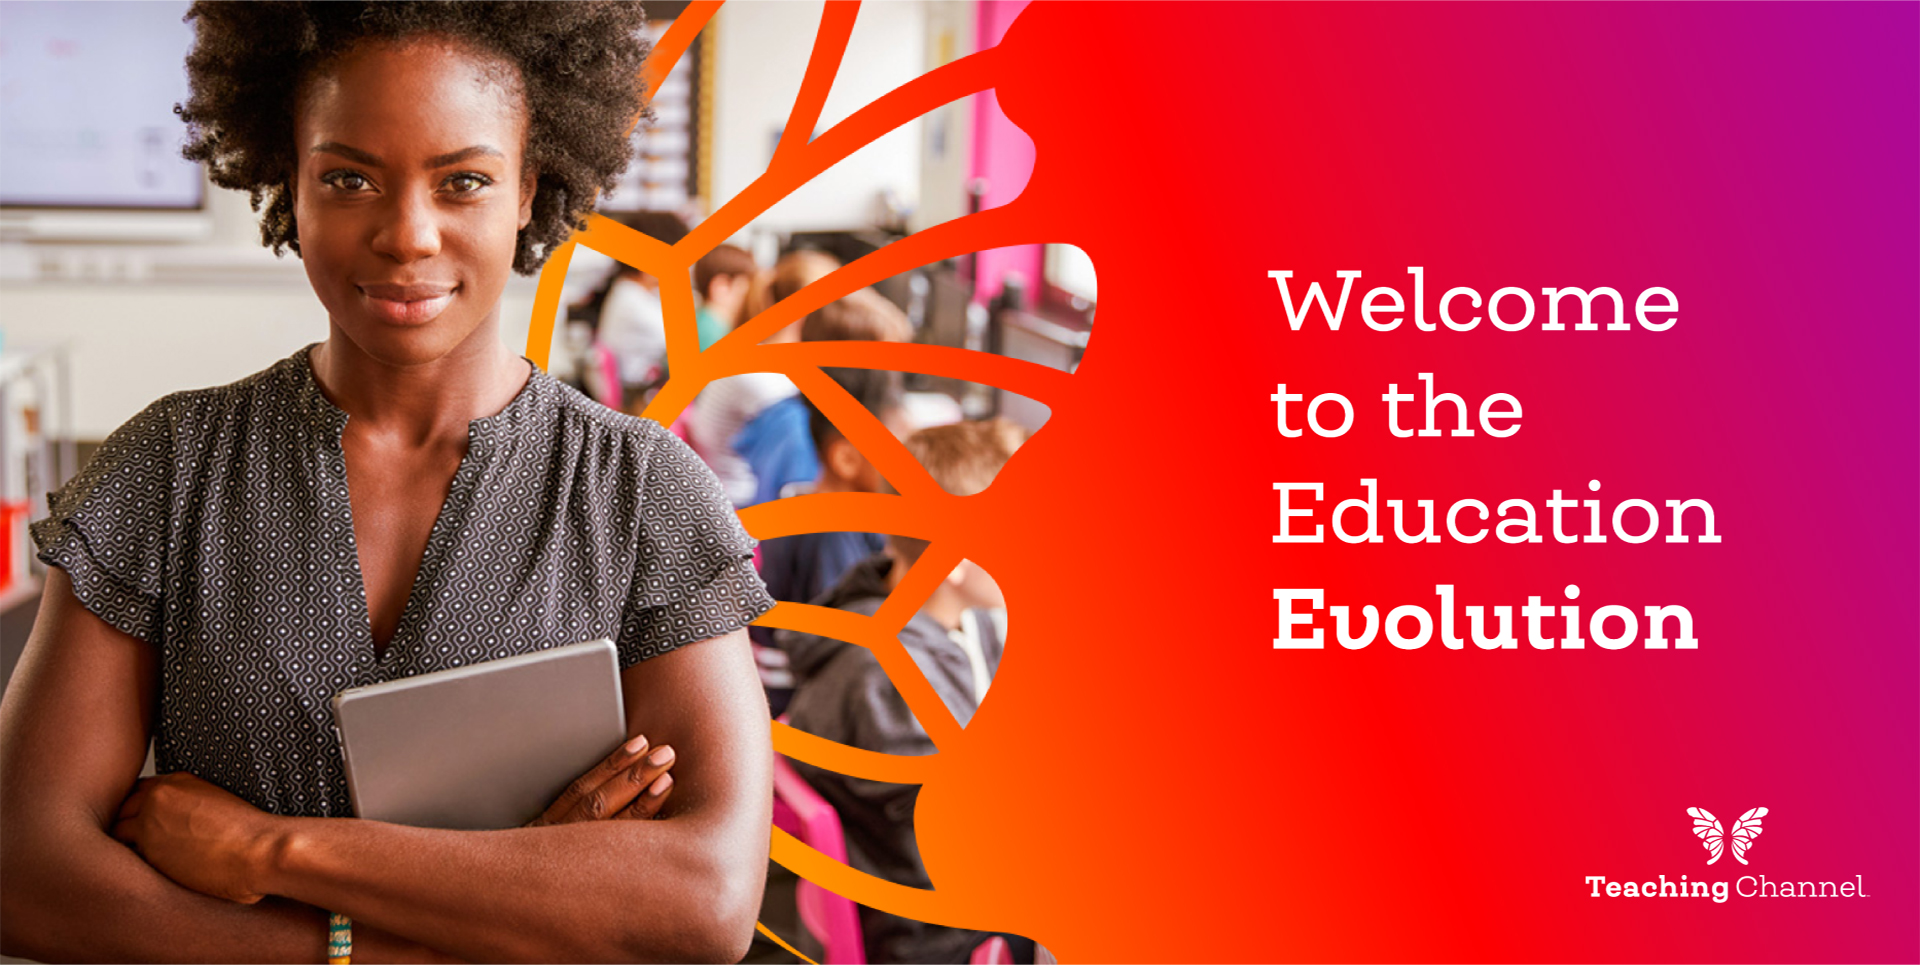 An image of the cover for the 'Welcome to the Education Evolution' brochure.